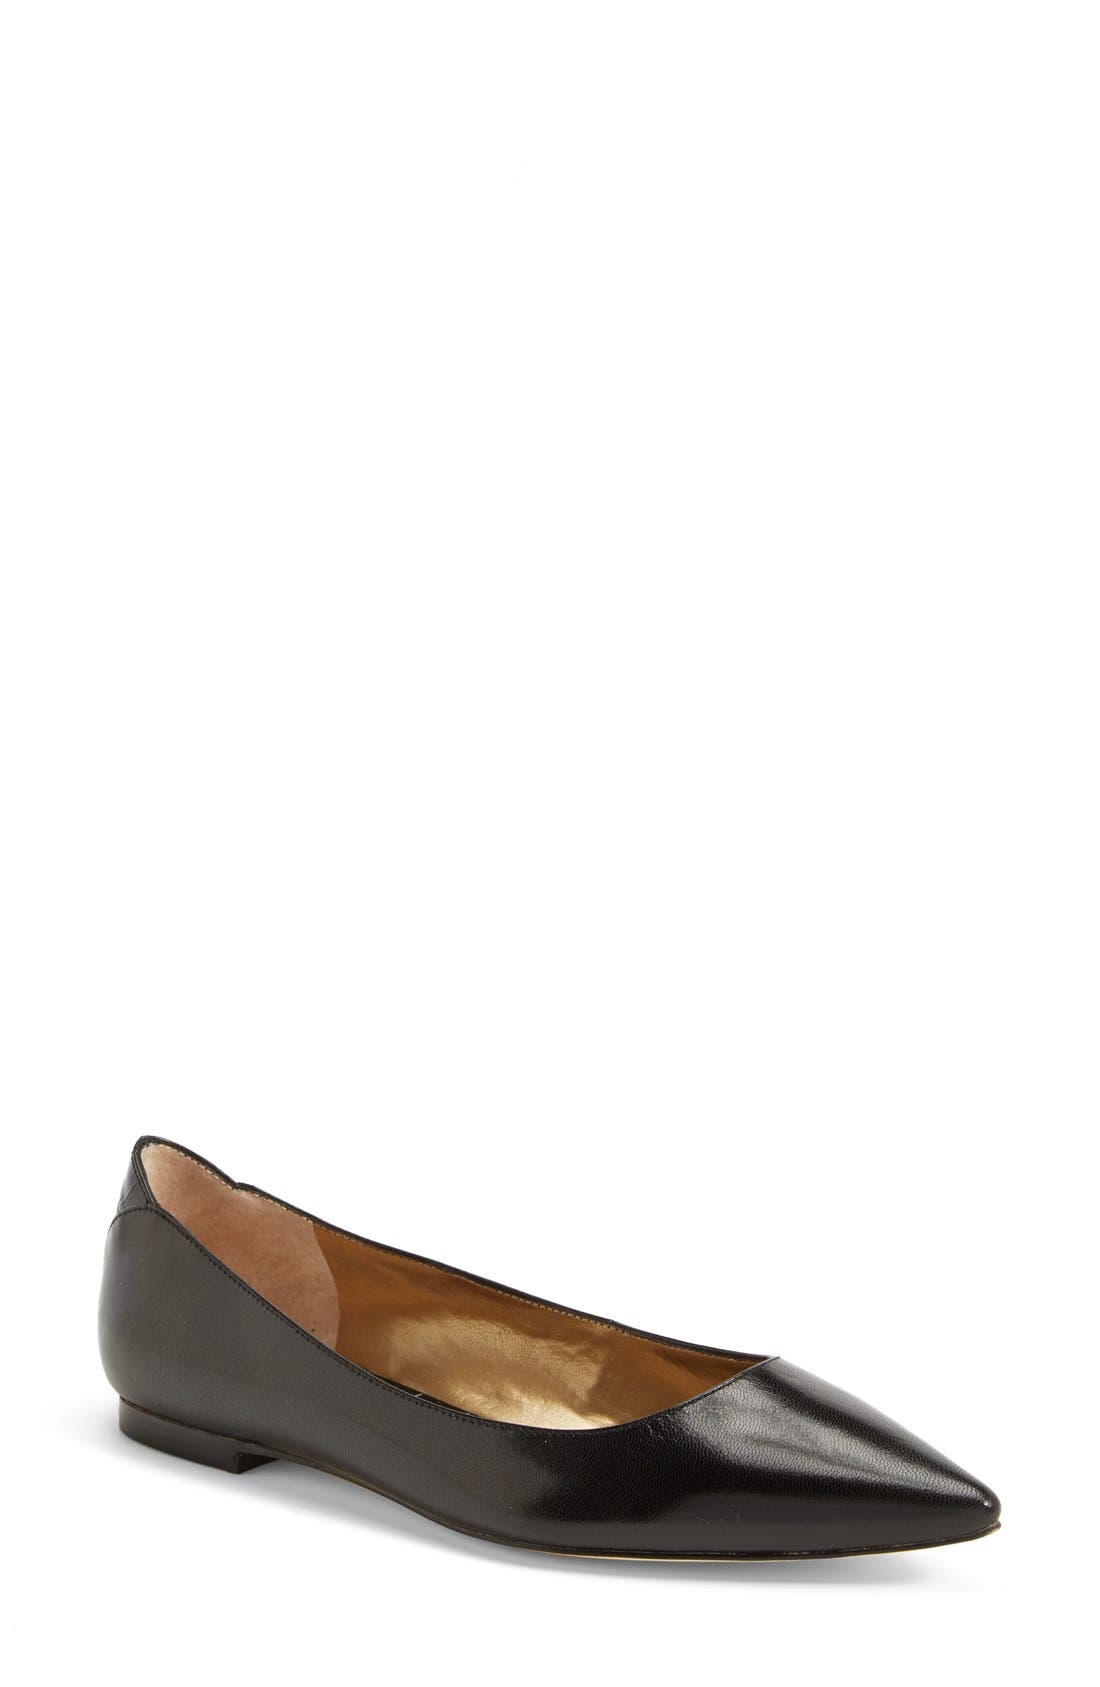 wide width pointed flats